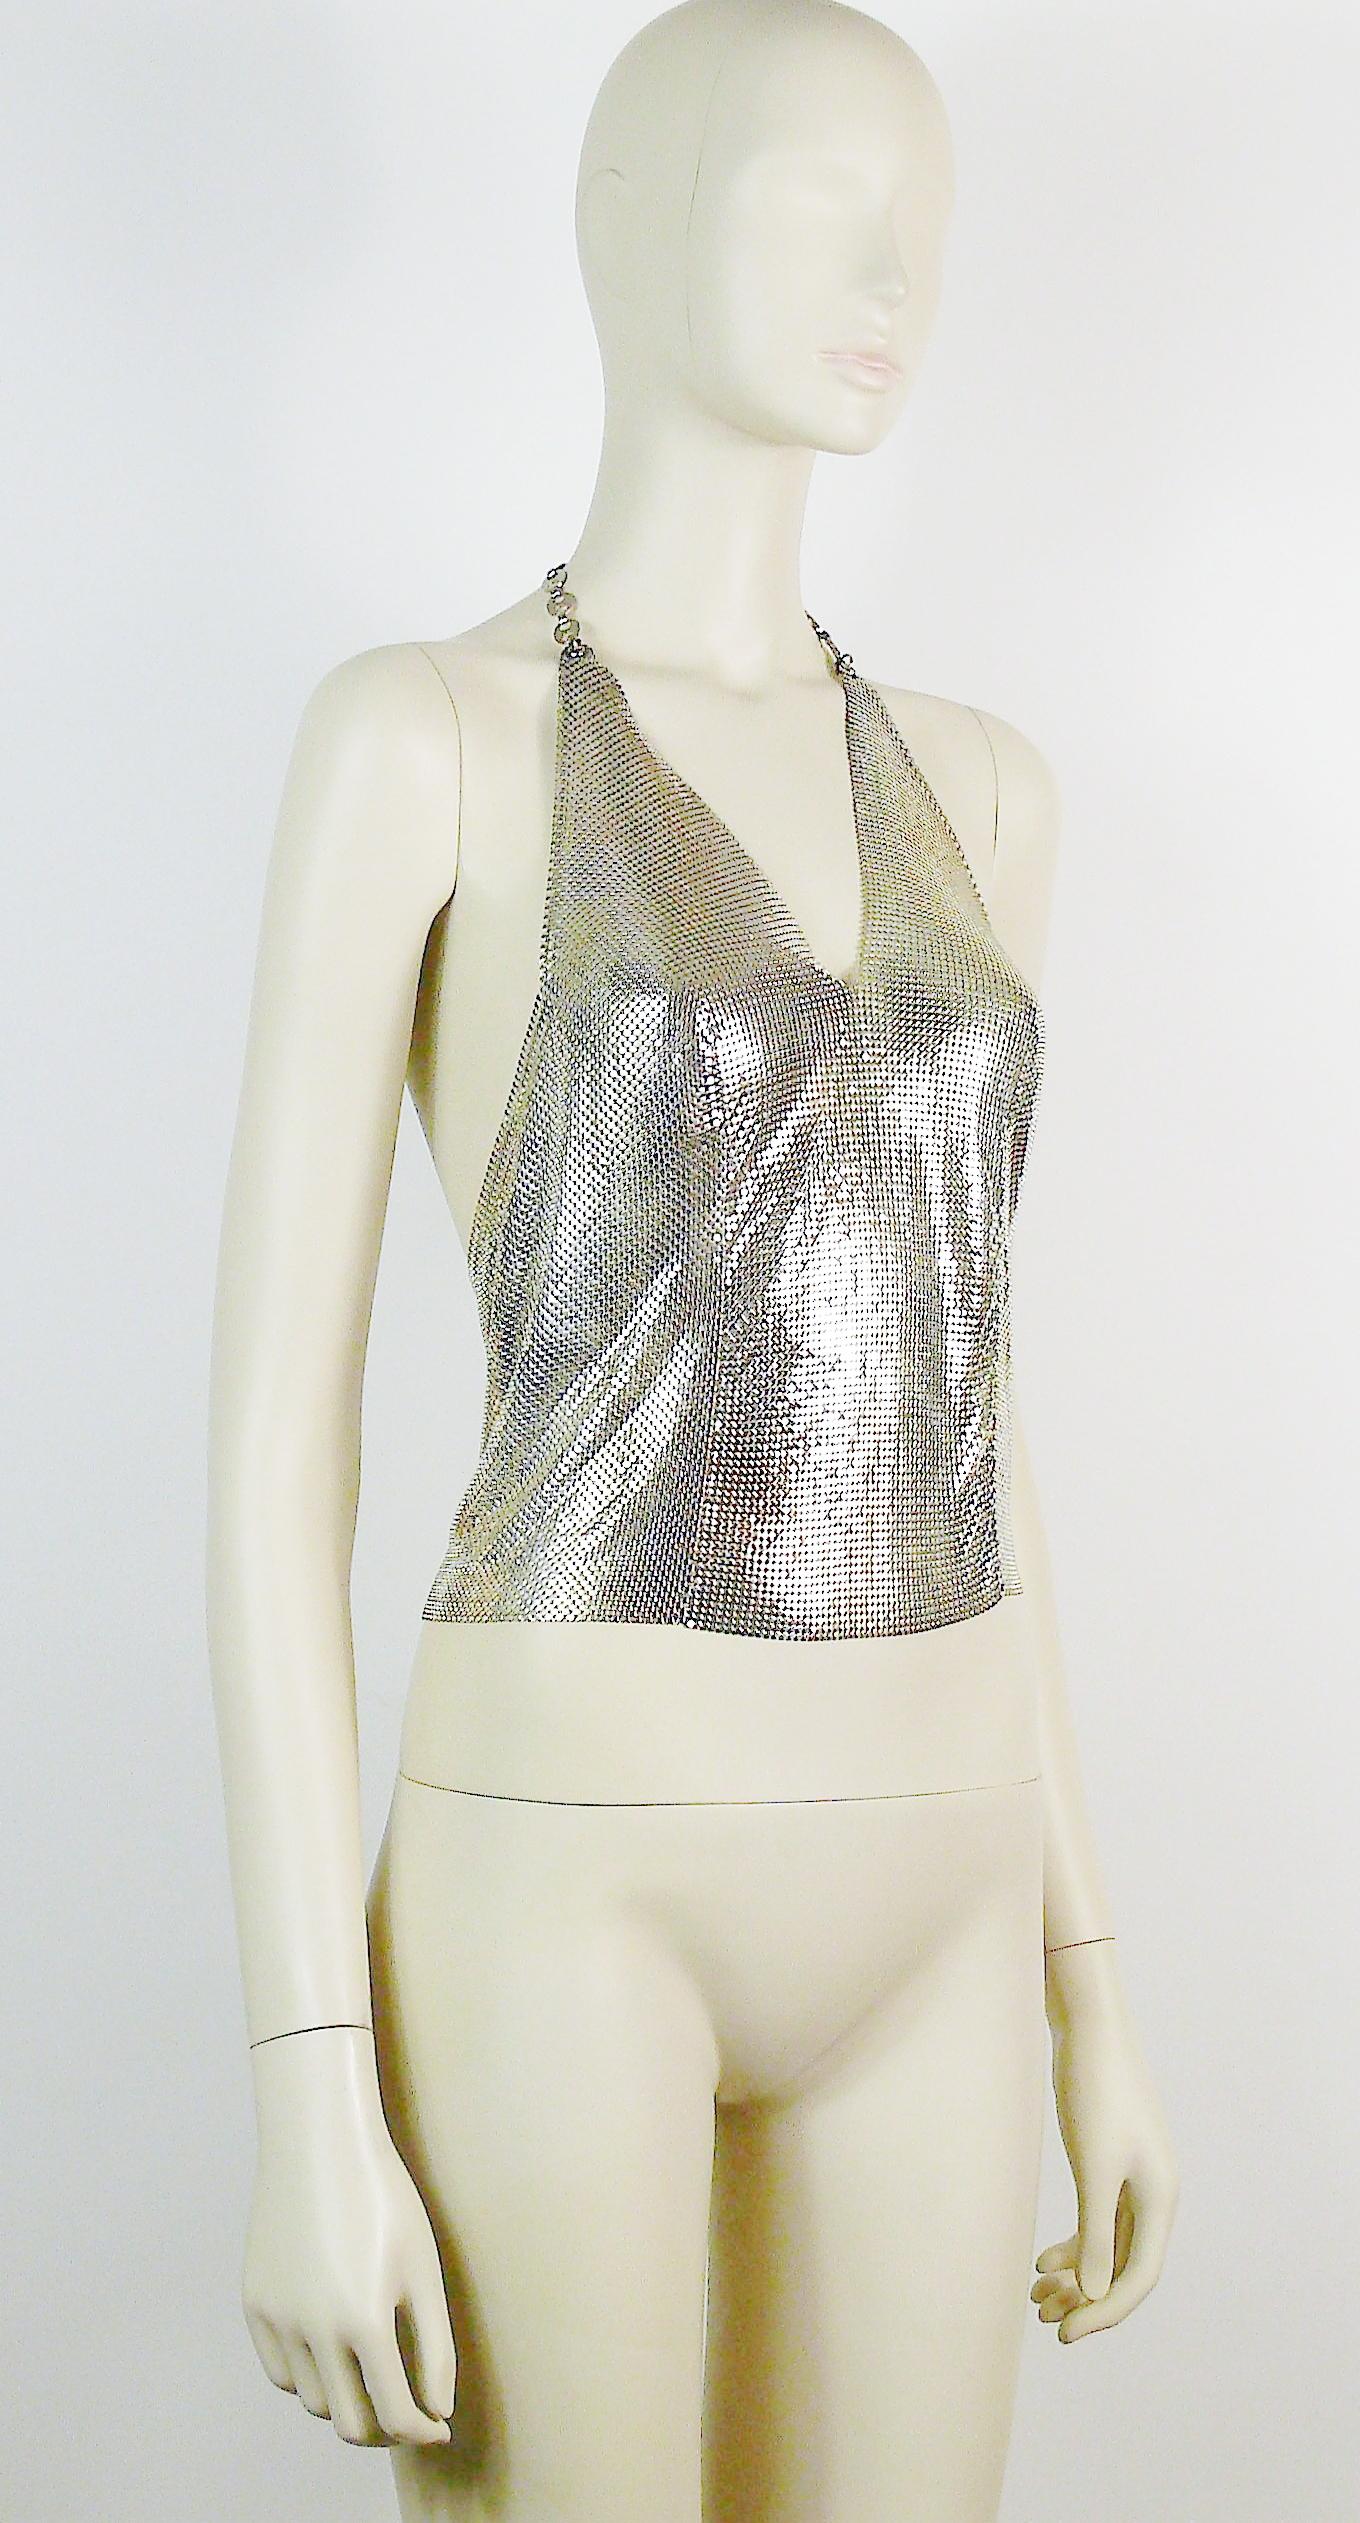 PACO RABANNE vintage polished silver toned metal mesh iconic backless top.

Adjustable size (extension chains).
Lobster clasps closure.

Metal tag embossed PACO RABANNE Paris.

Photographied on a XS mannequin.
This top will fit XS to S